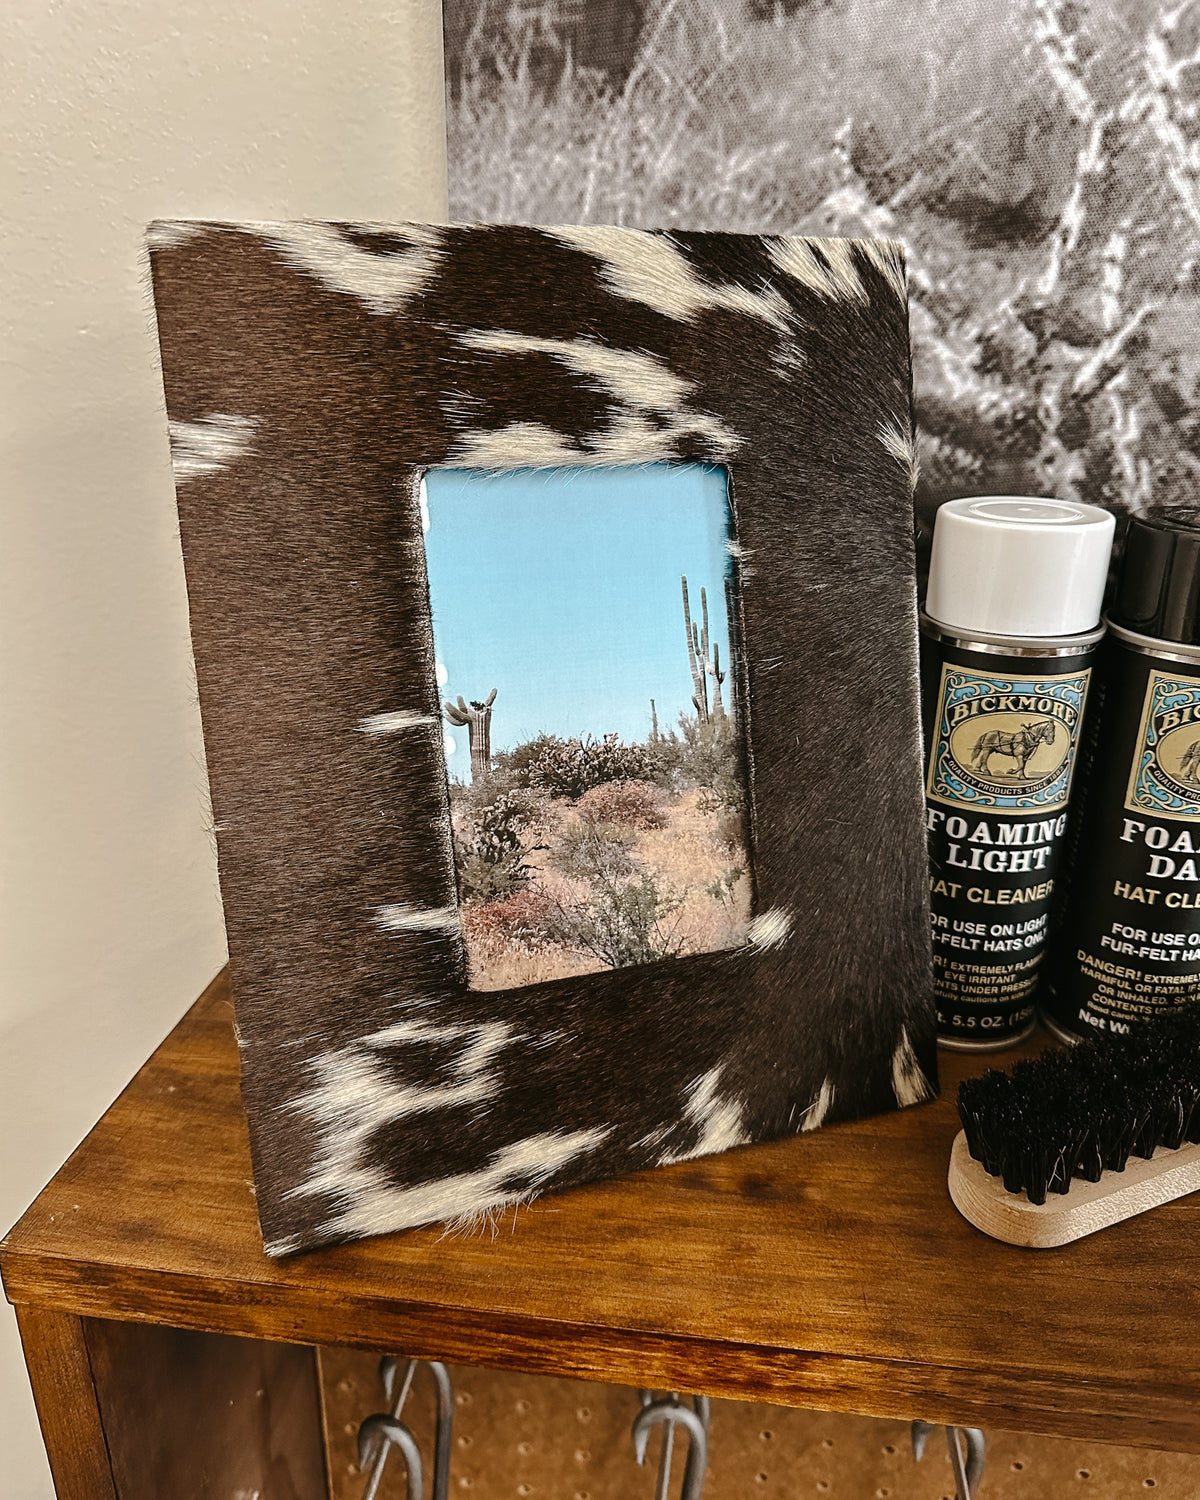 Cowhide Picture Frame: Black